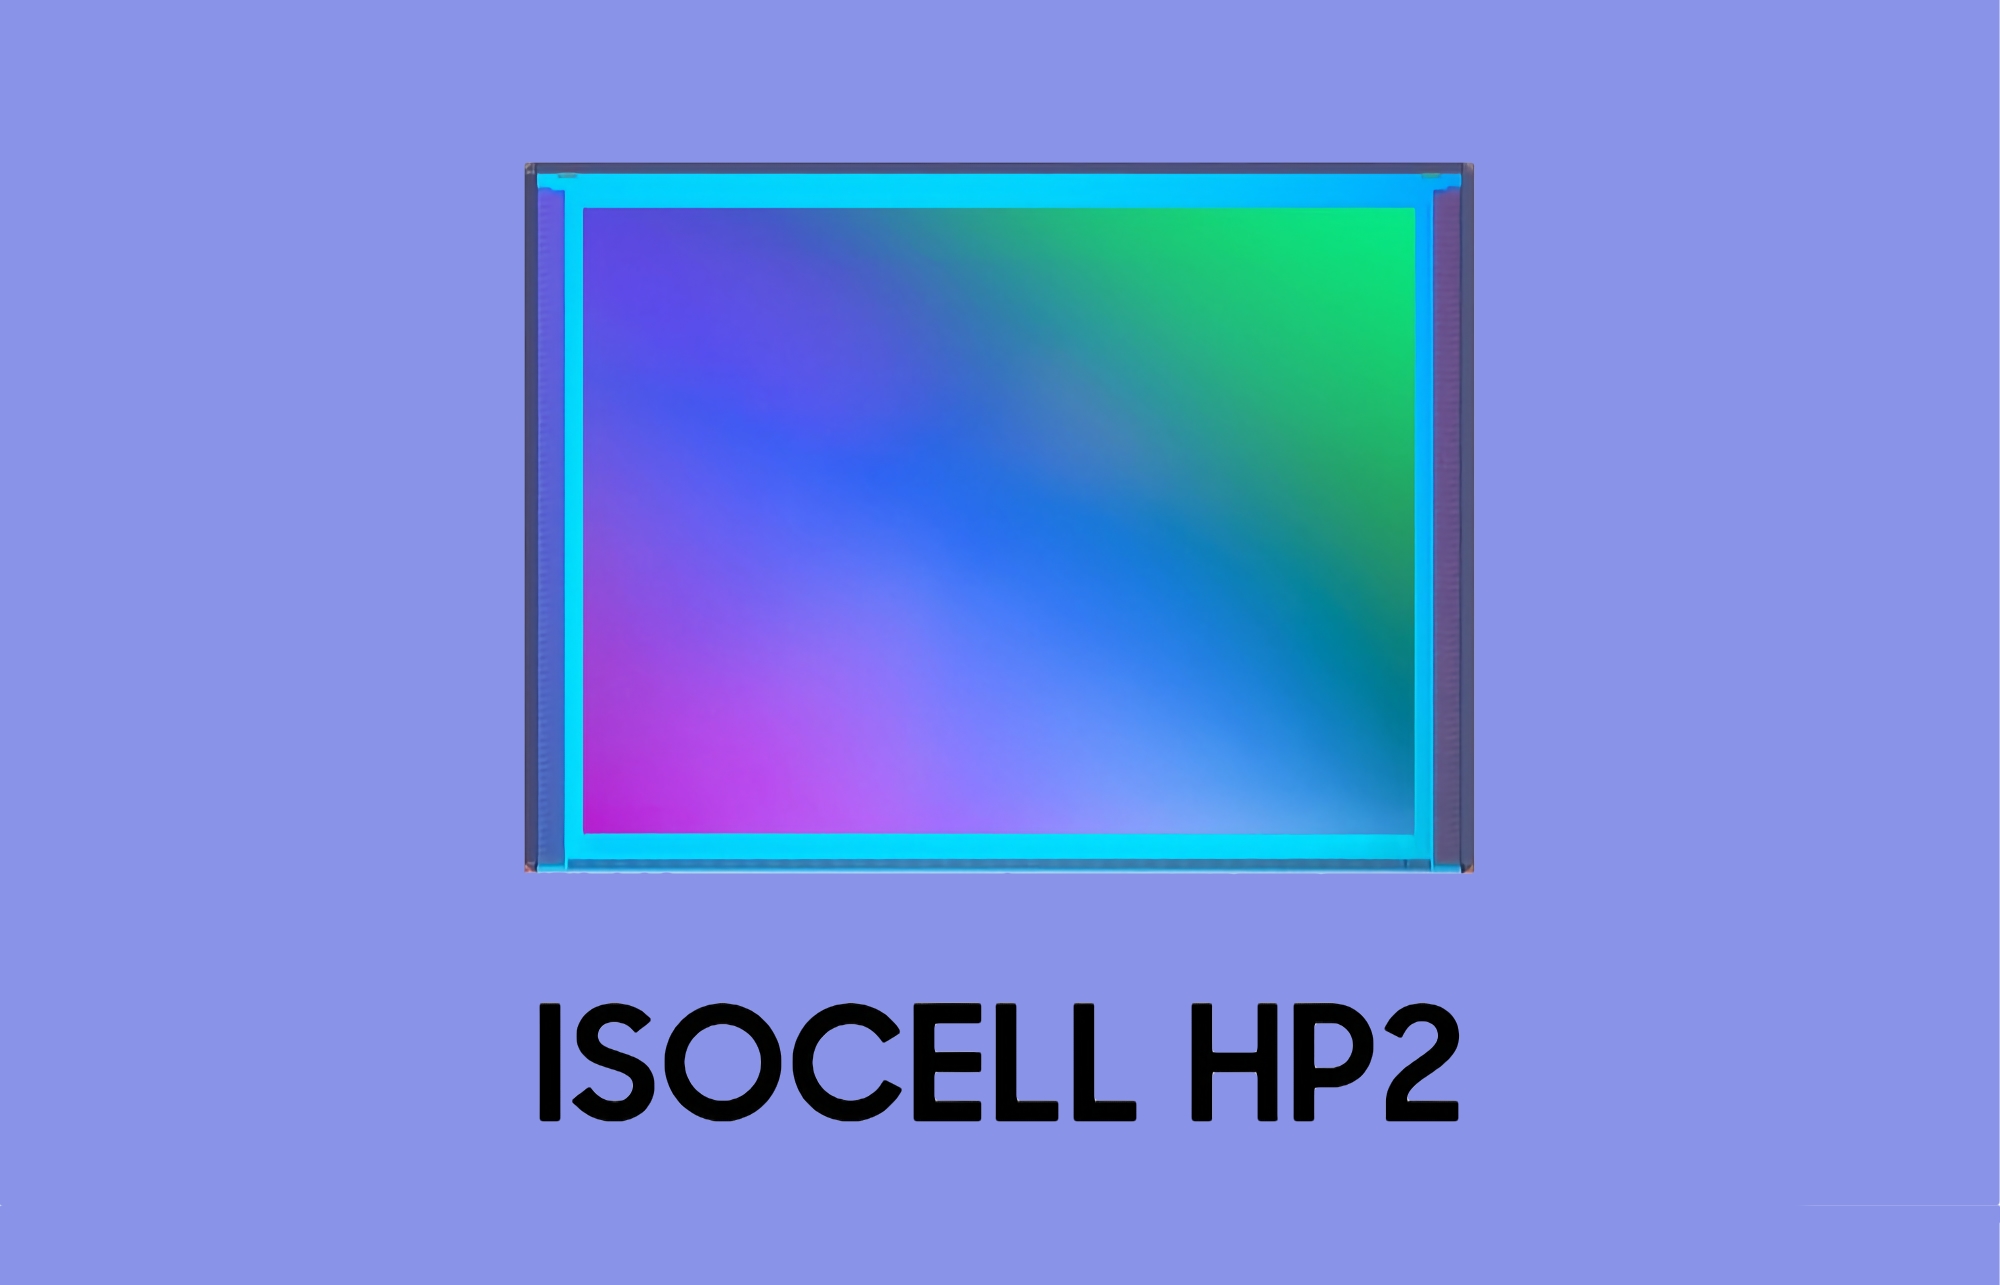 Samsung introduced ISOCELL HP2: a new 200-megapixel sensor for the Galaxy S23 Ultra flagship